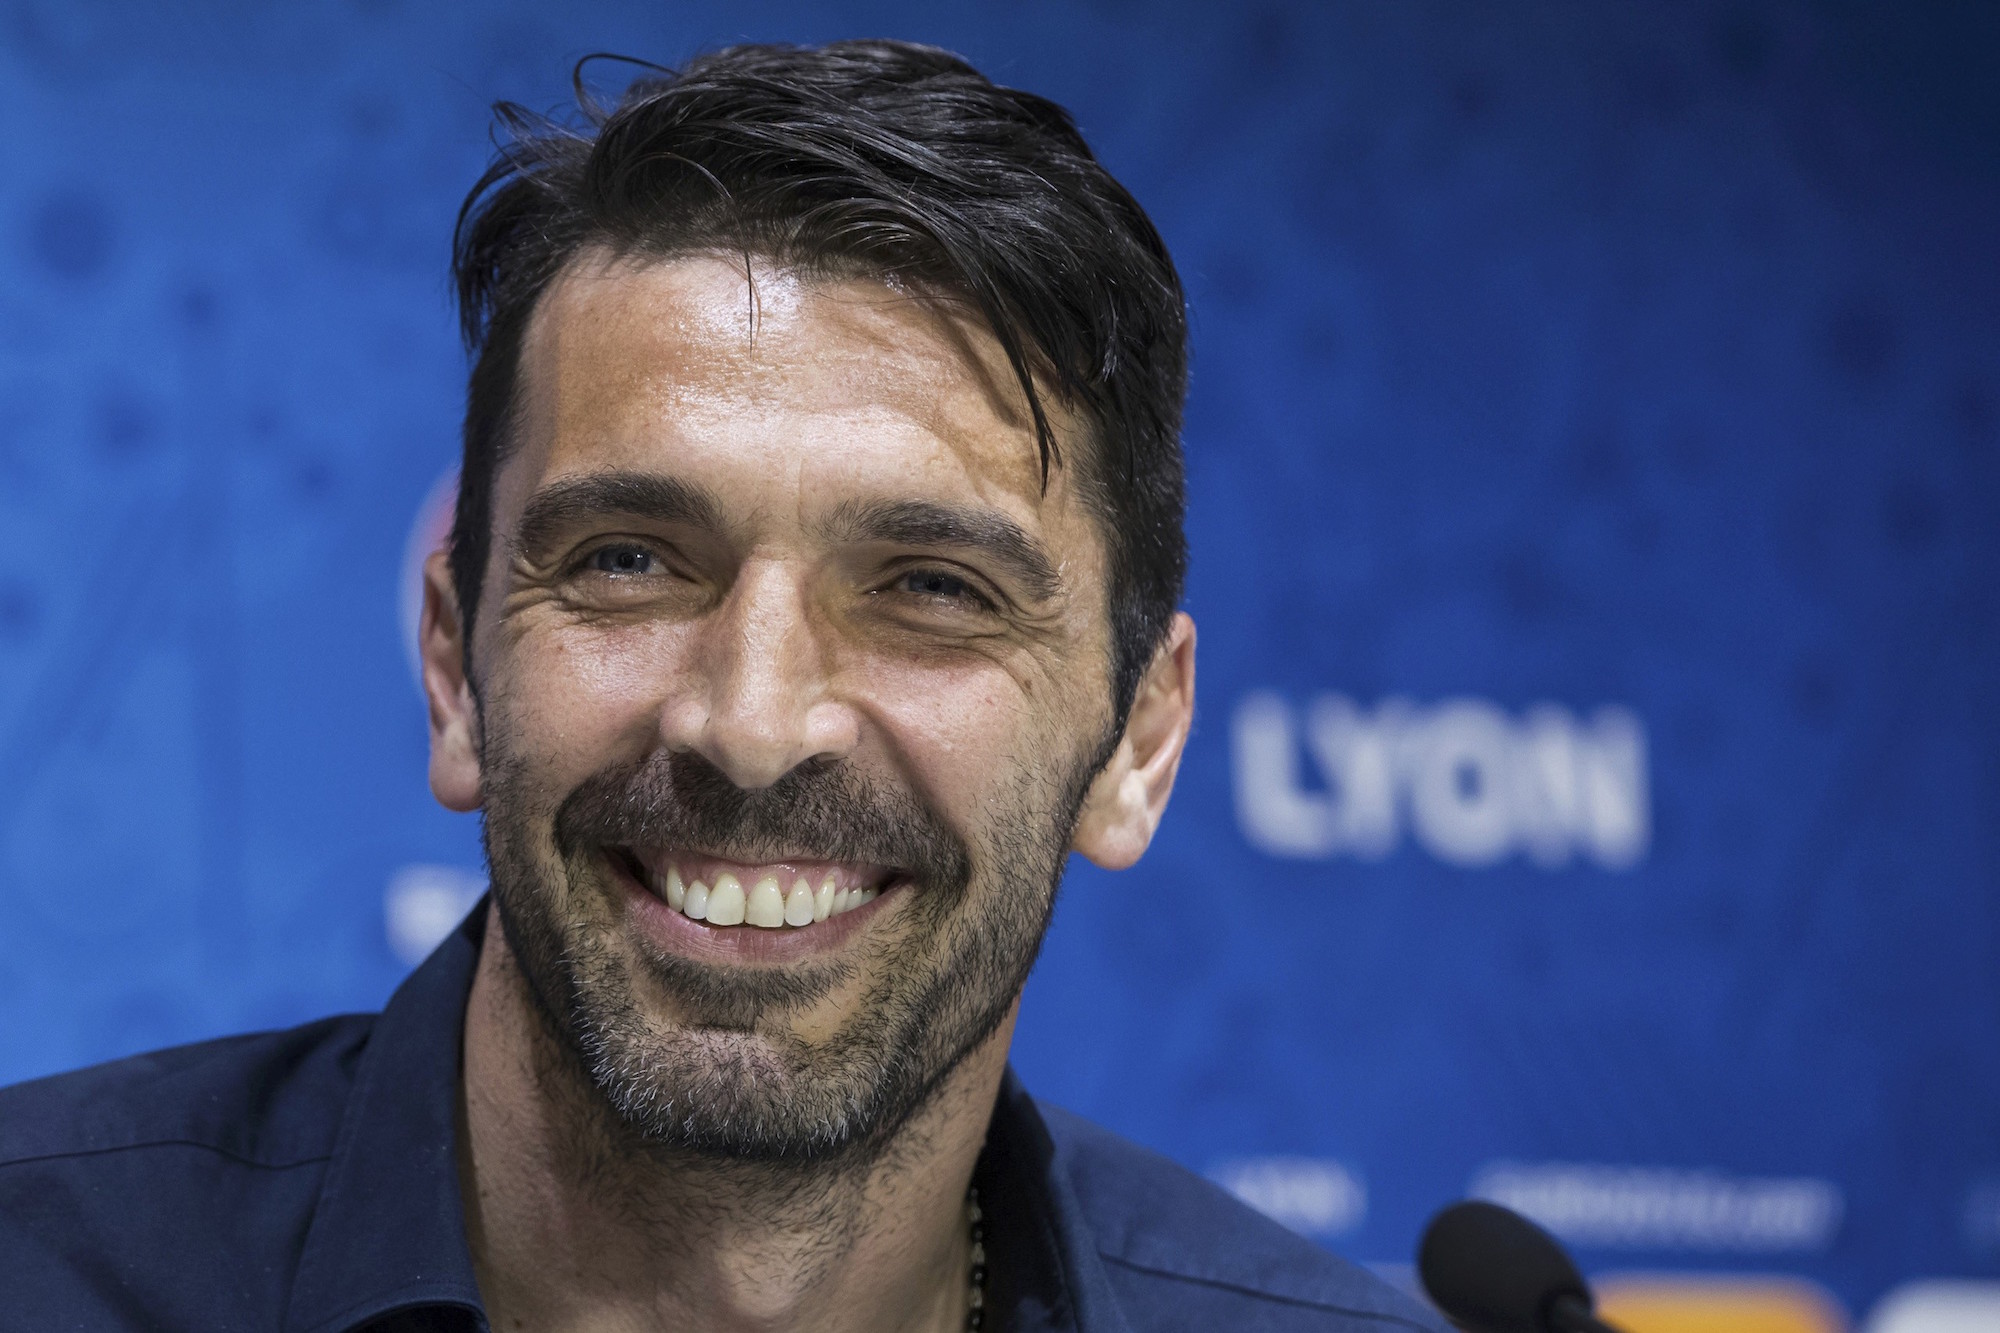 Football Soccer - EURO 2016 - Italy News Conference - Decines-Charpieu, France 12/6/16 Italy's coach Gianluigi Buffon attends a news conference REUTERS/UEFA/Handout via REUTERS NO SALES. NO ARCHIVES. THIS IMAGE HAS BEEN SUPPLIED BY A THIRD PARTY. IT IS DISTRIBUTED, EXACTLY AS RECEIVED BY REUTERS, AS A SERVICE TO CLIENTS.